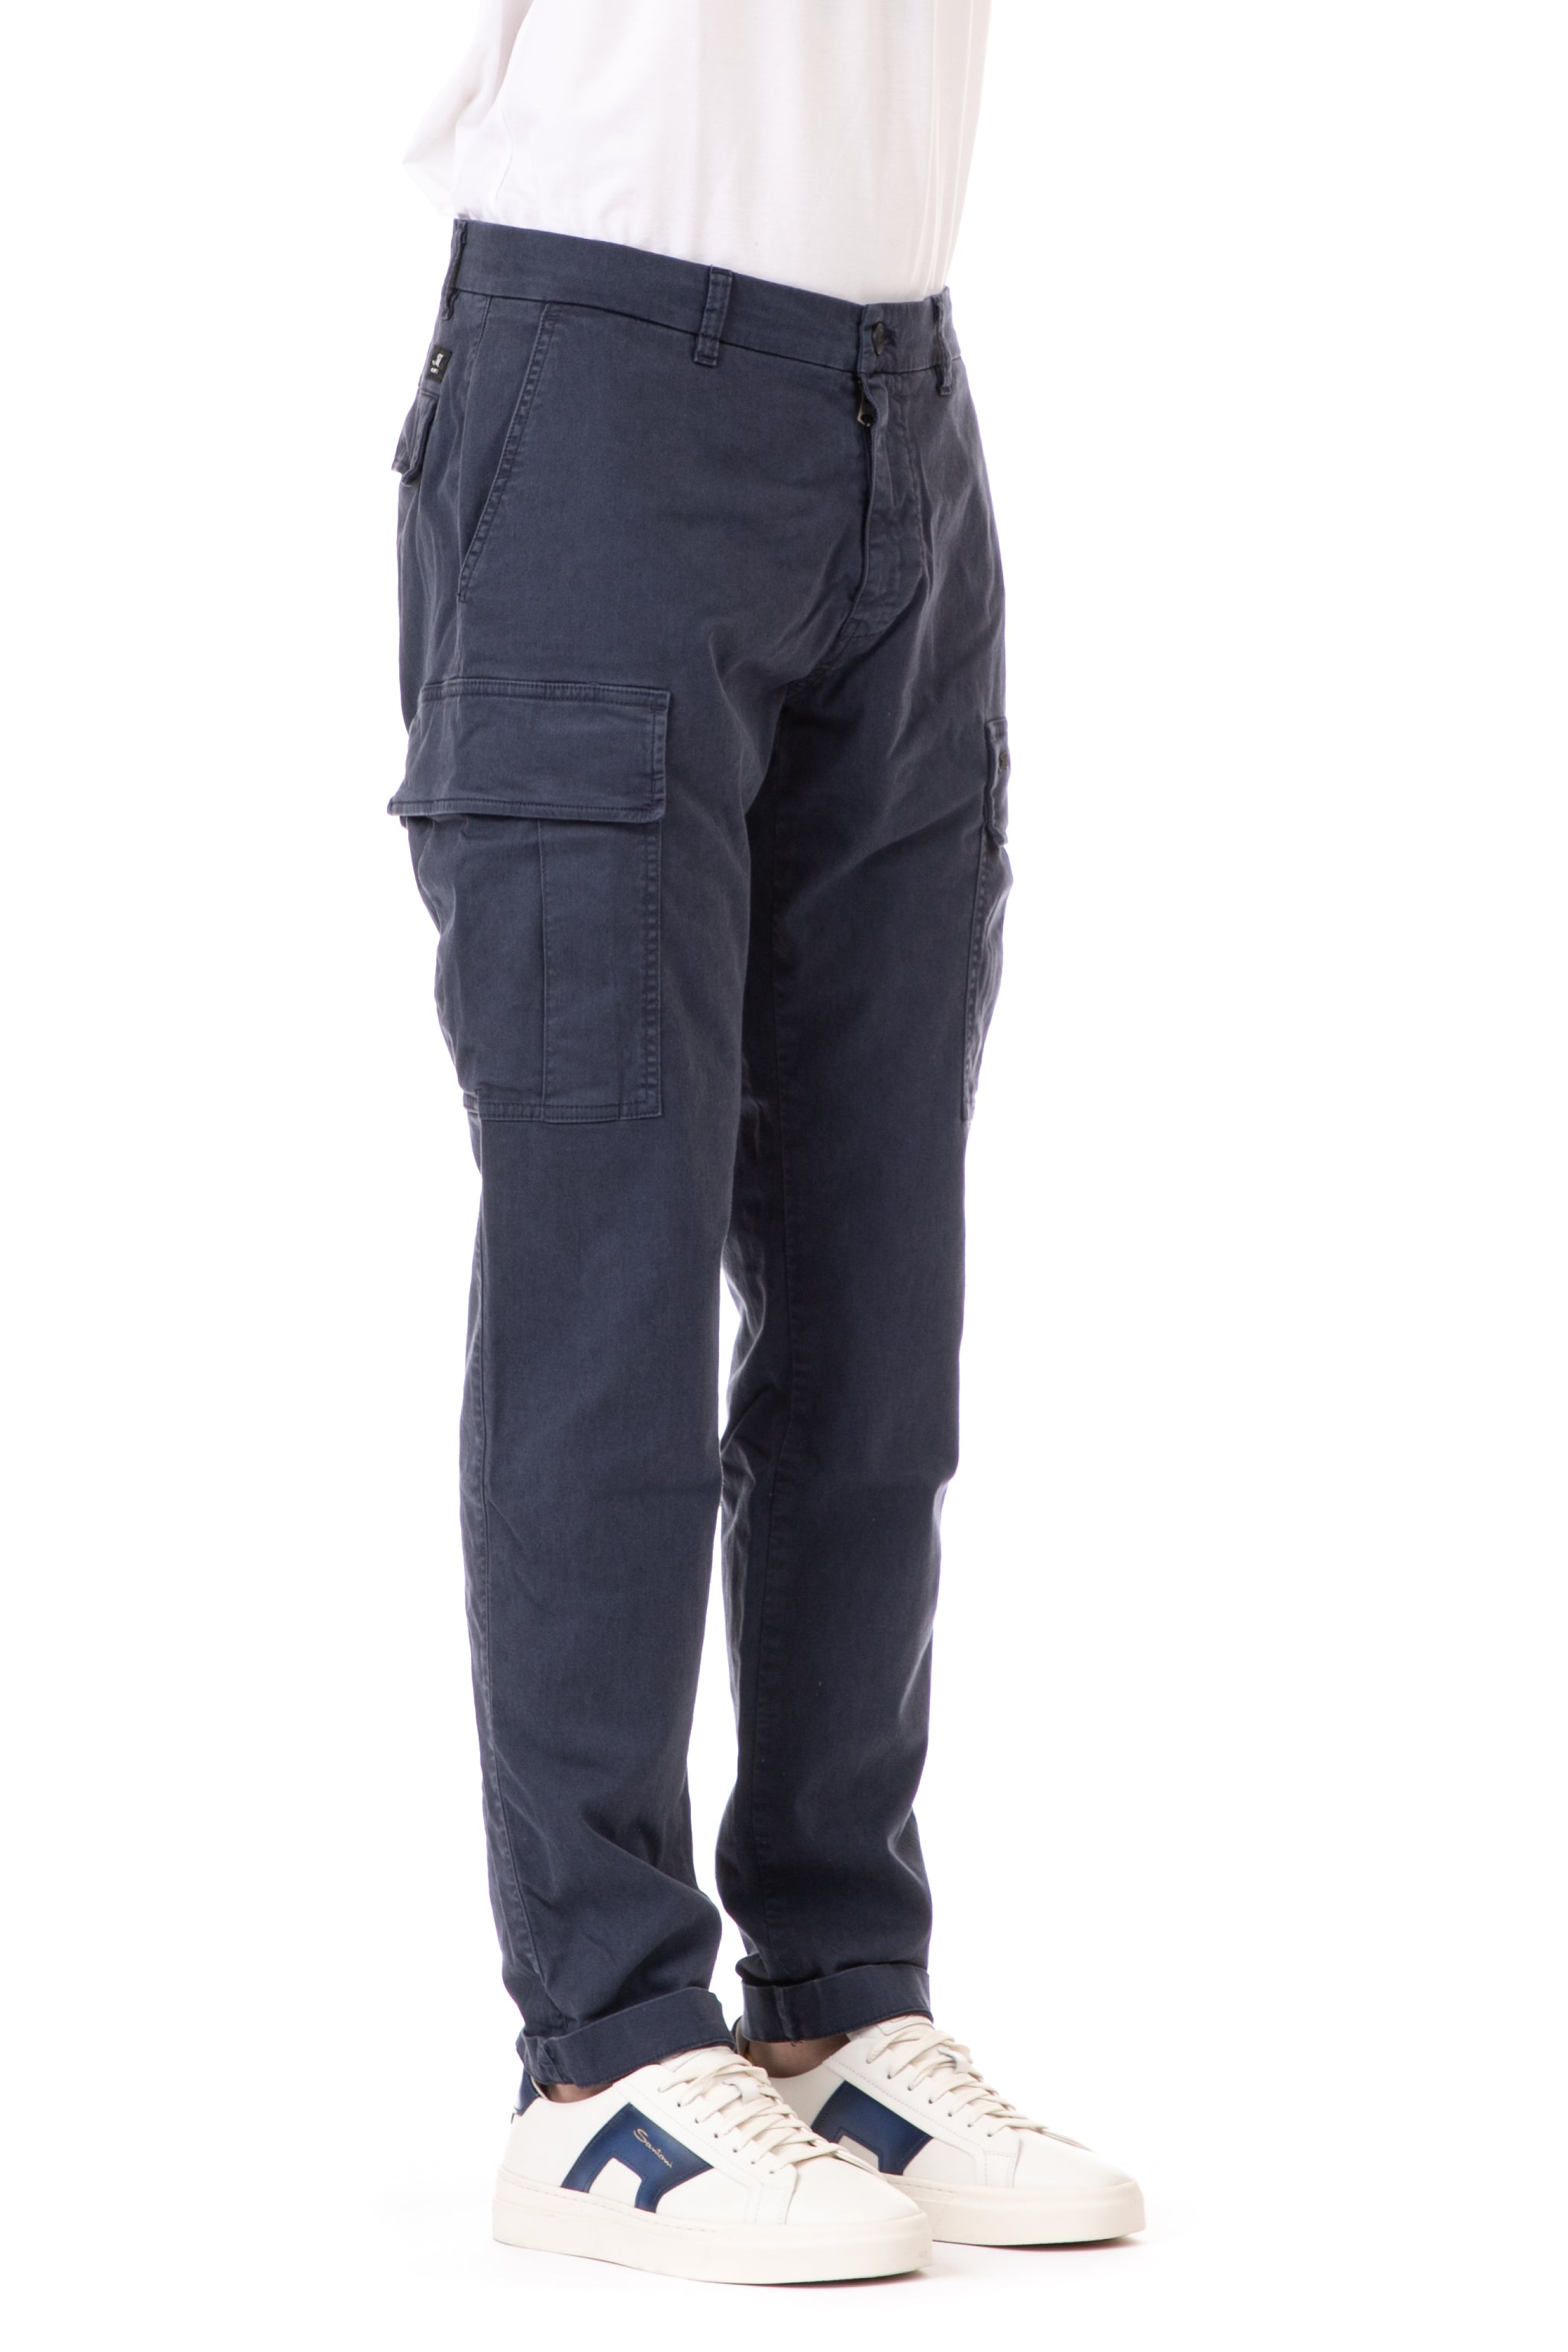 Airfield model cargo trousers in cotton-lyocell